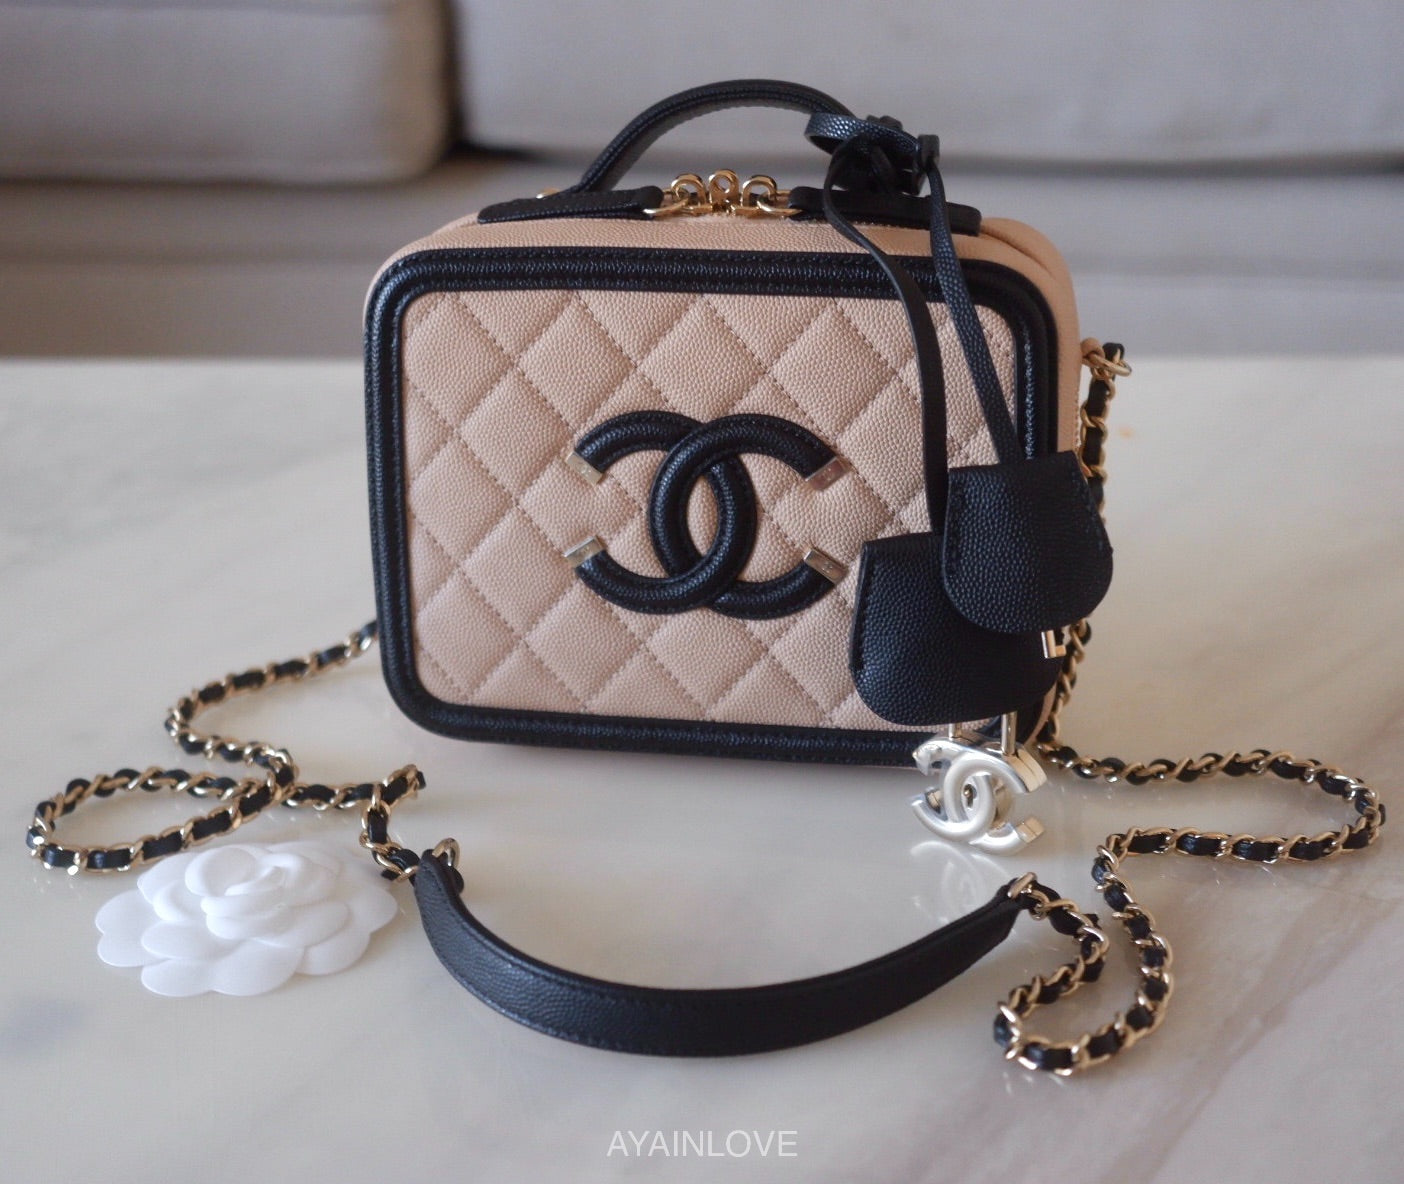 Chanel Quilted Small CC Filigree Vanity Case Beige Black Caviar – Coco  Approved Studio